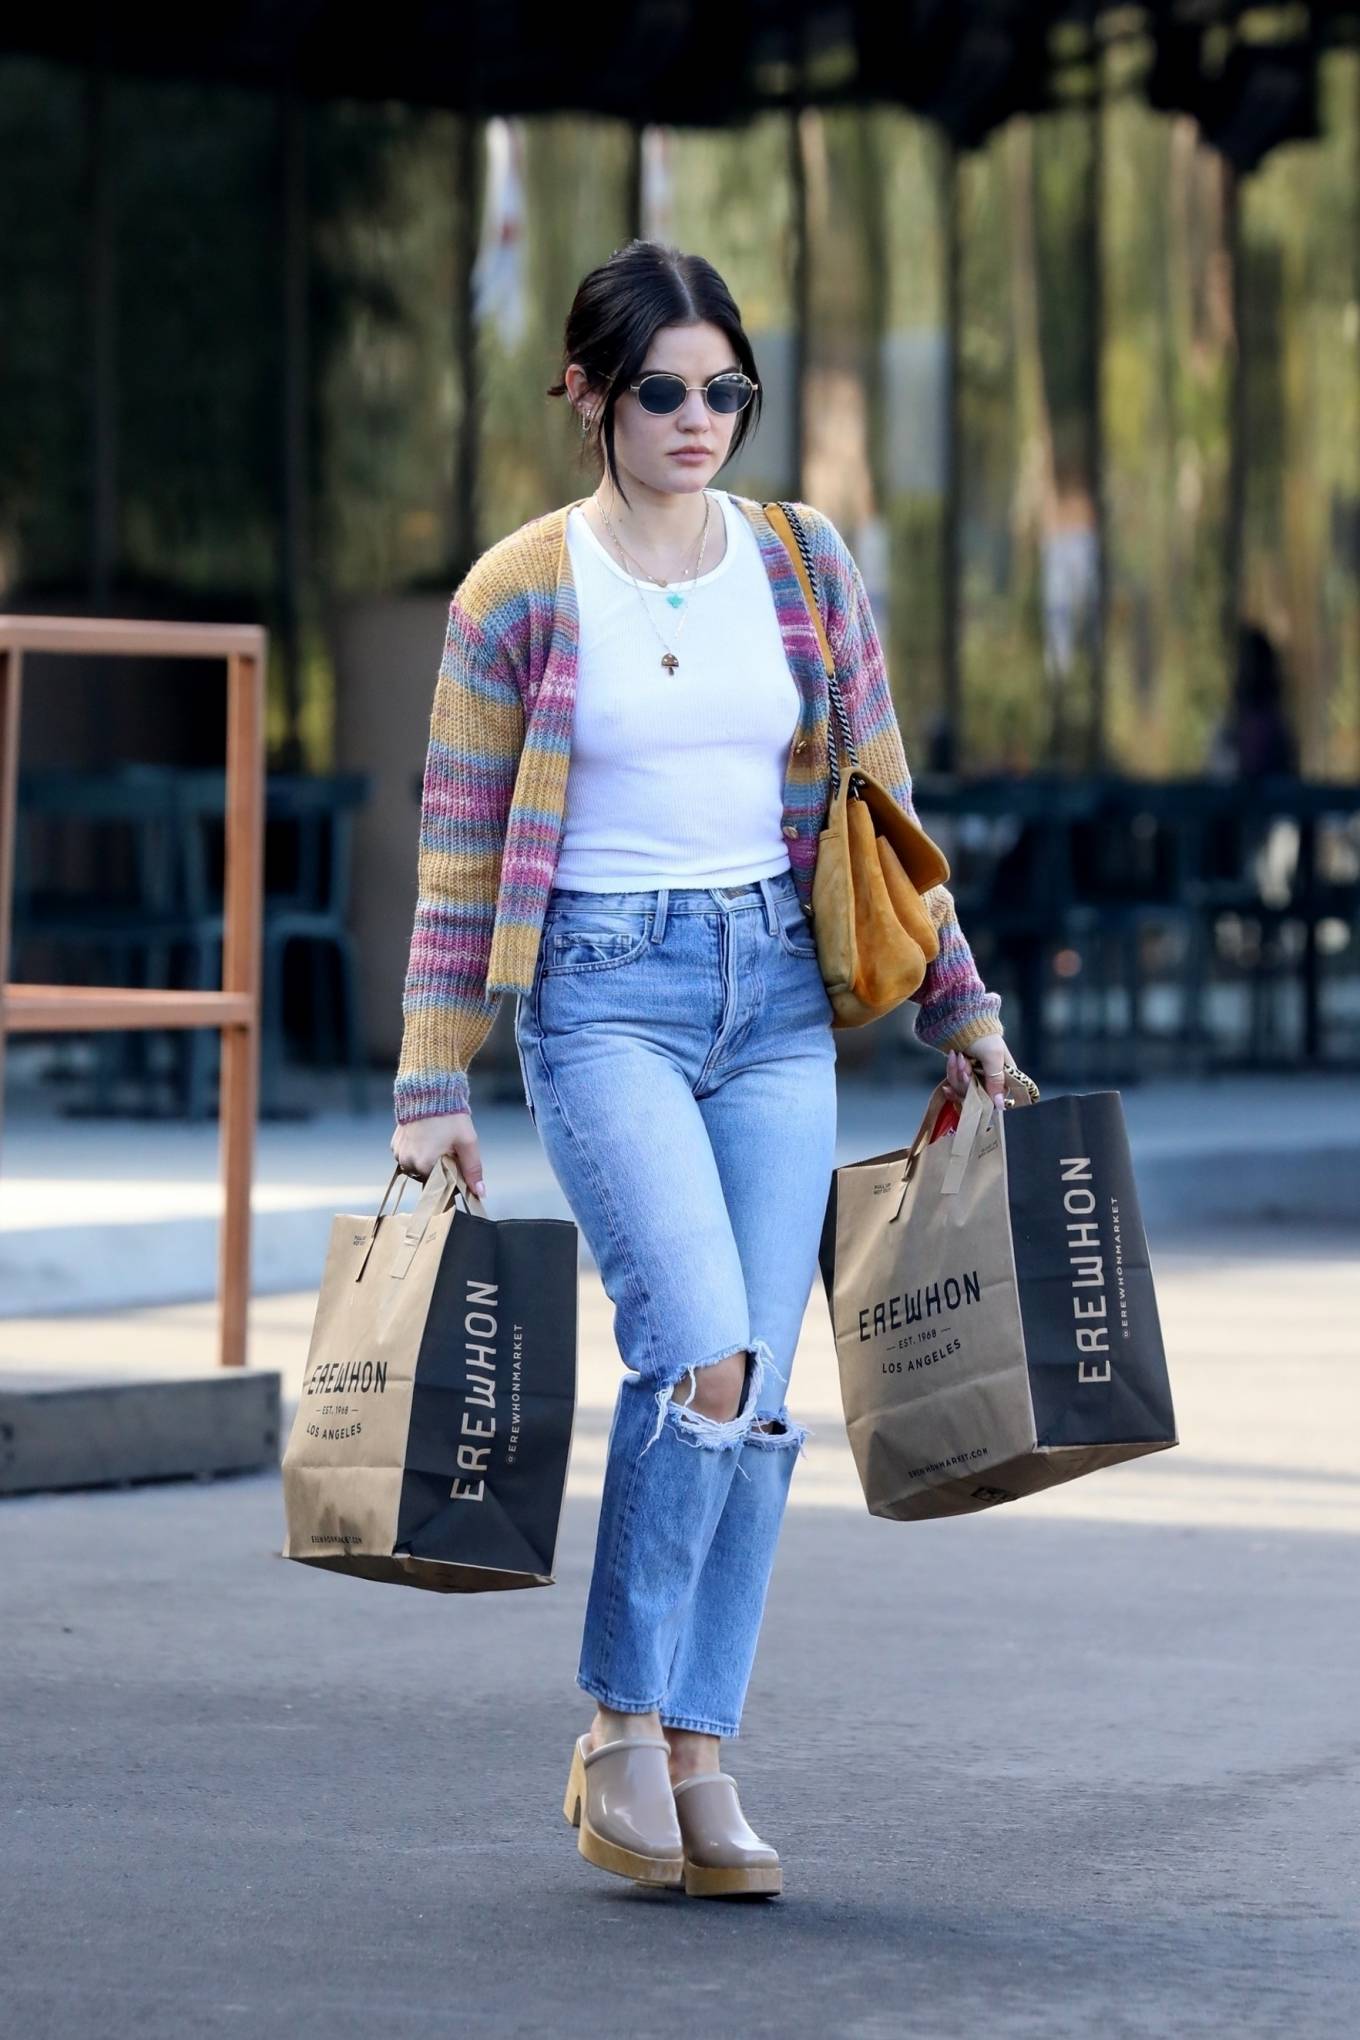 Lucy Hale 2021 : Lucy Hale – Grocery shopping at Erewhon Organic Grocers in Los Angeles-06